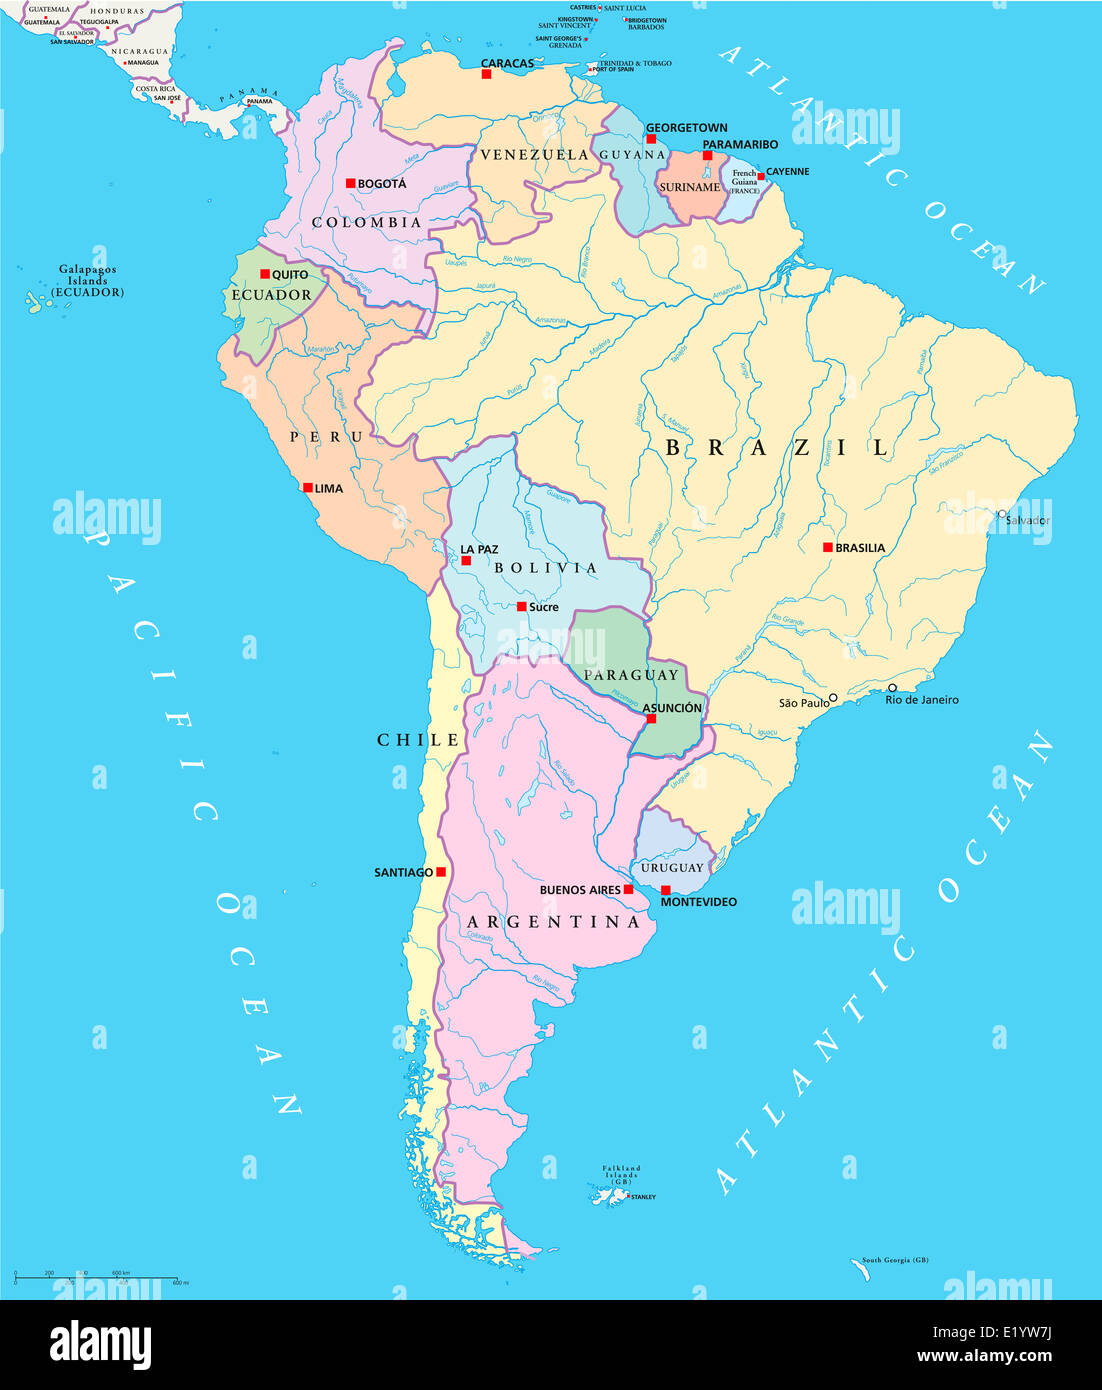 South America Single States Map with capitals, national borders, lakes and rivers. English labeling and scaling. Stock Photo